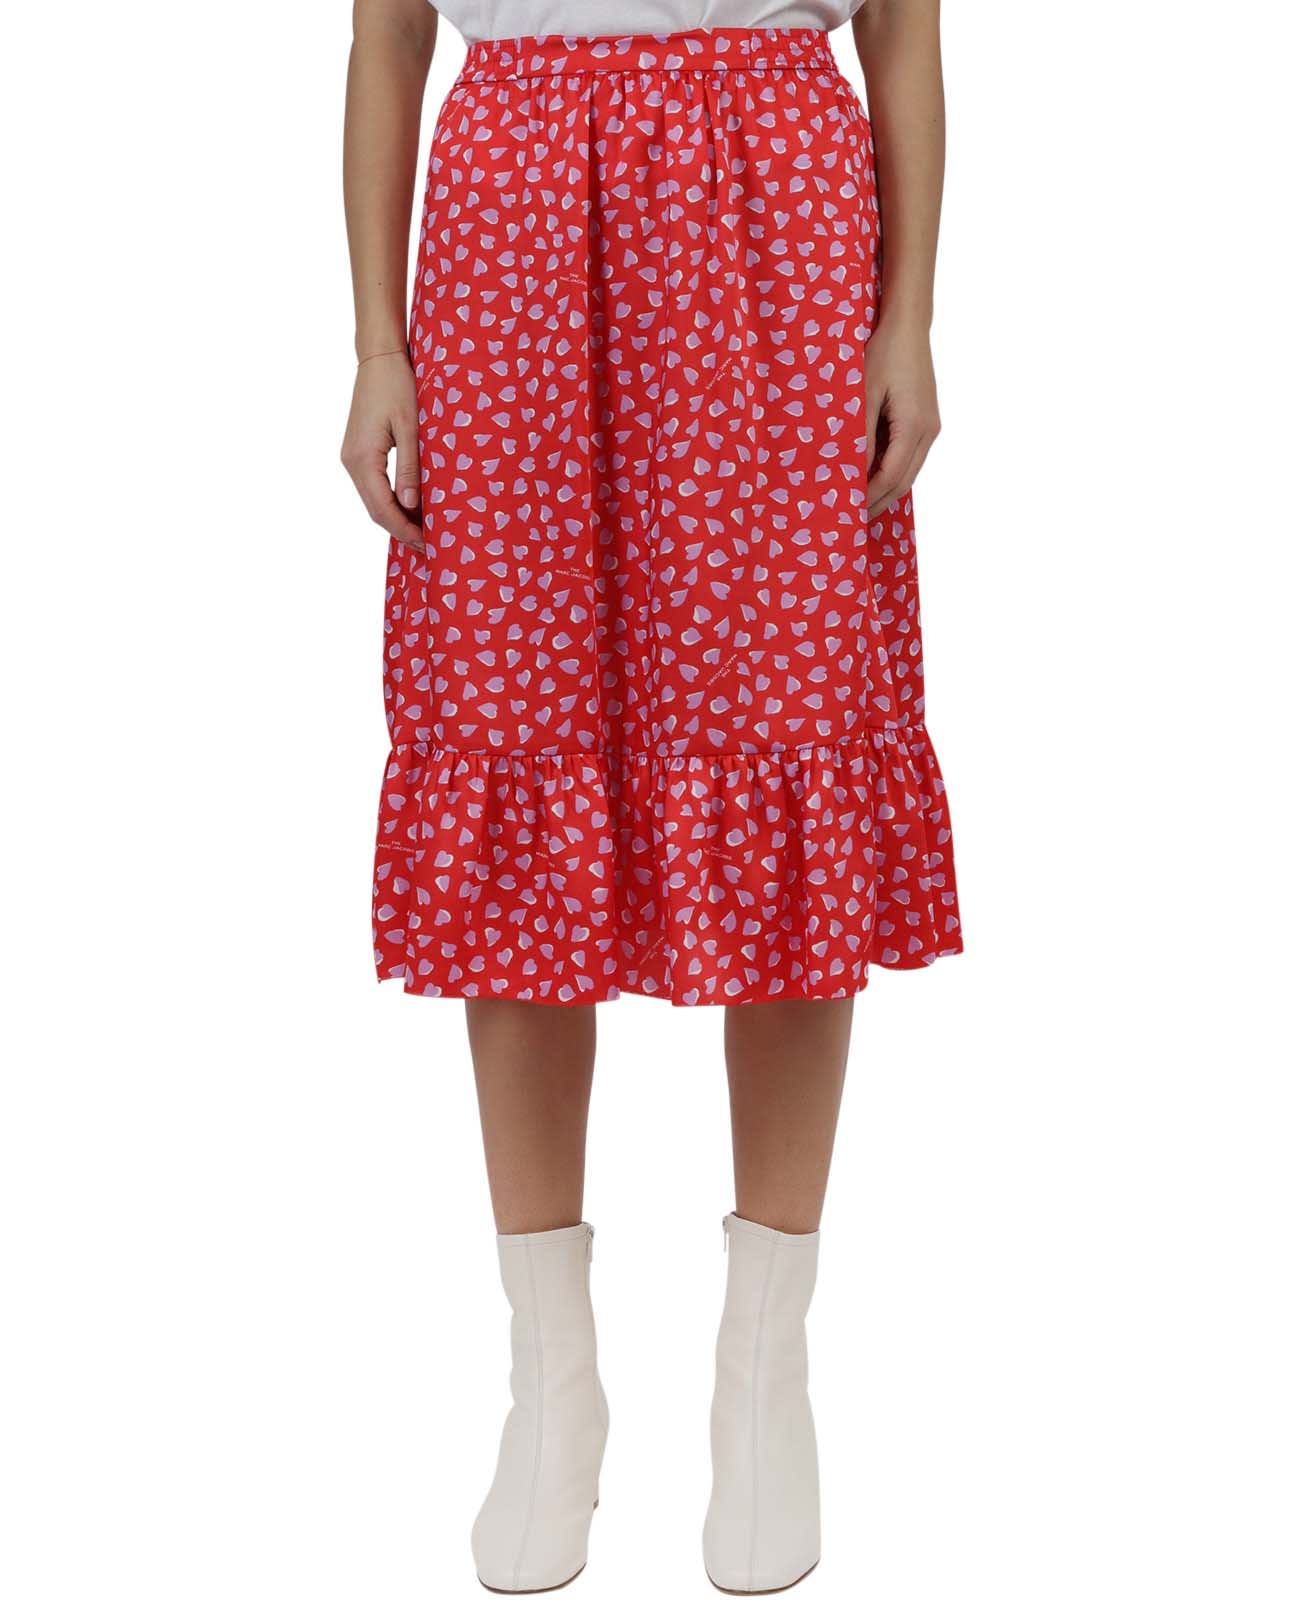 The Marc Jacobs Red Heart Skirt